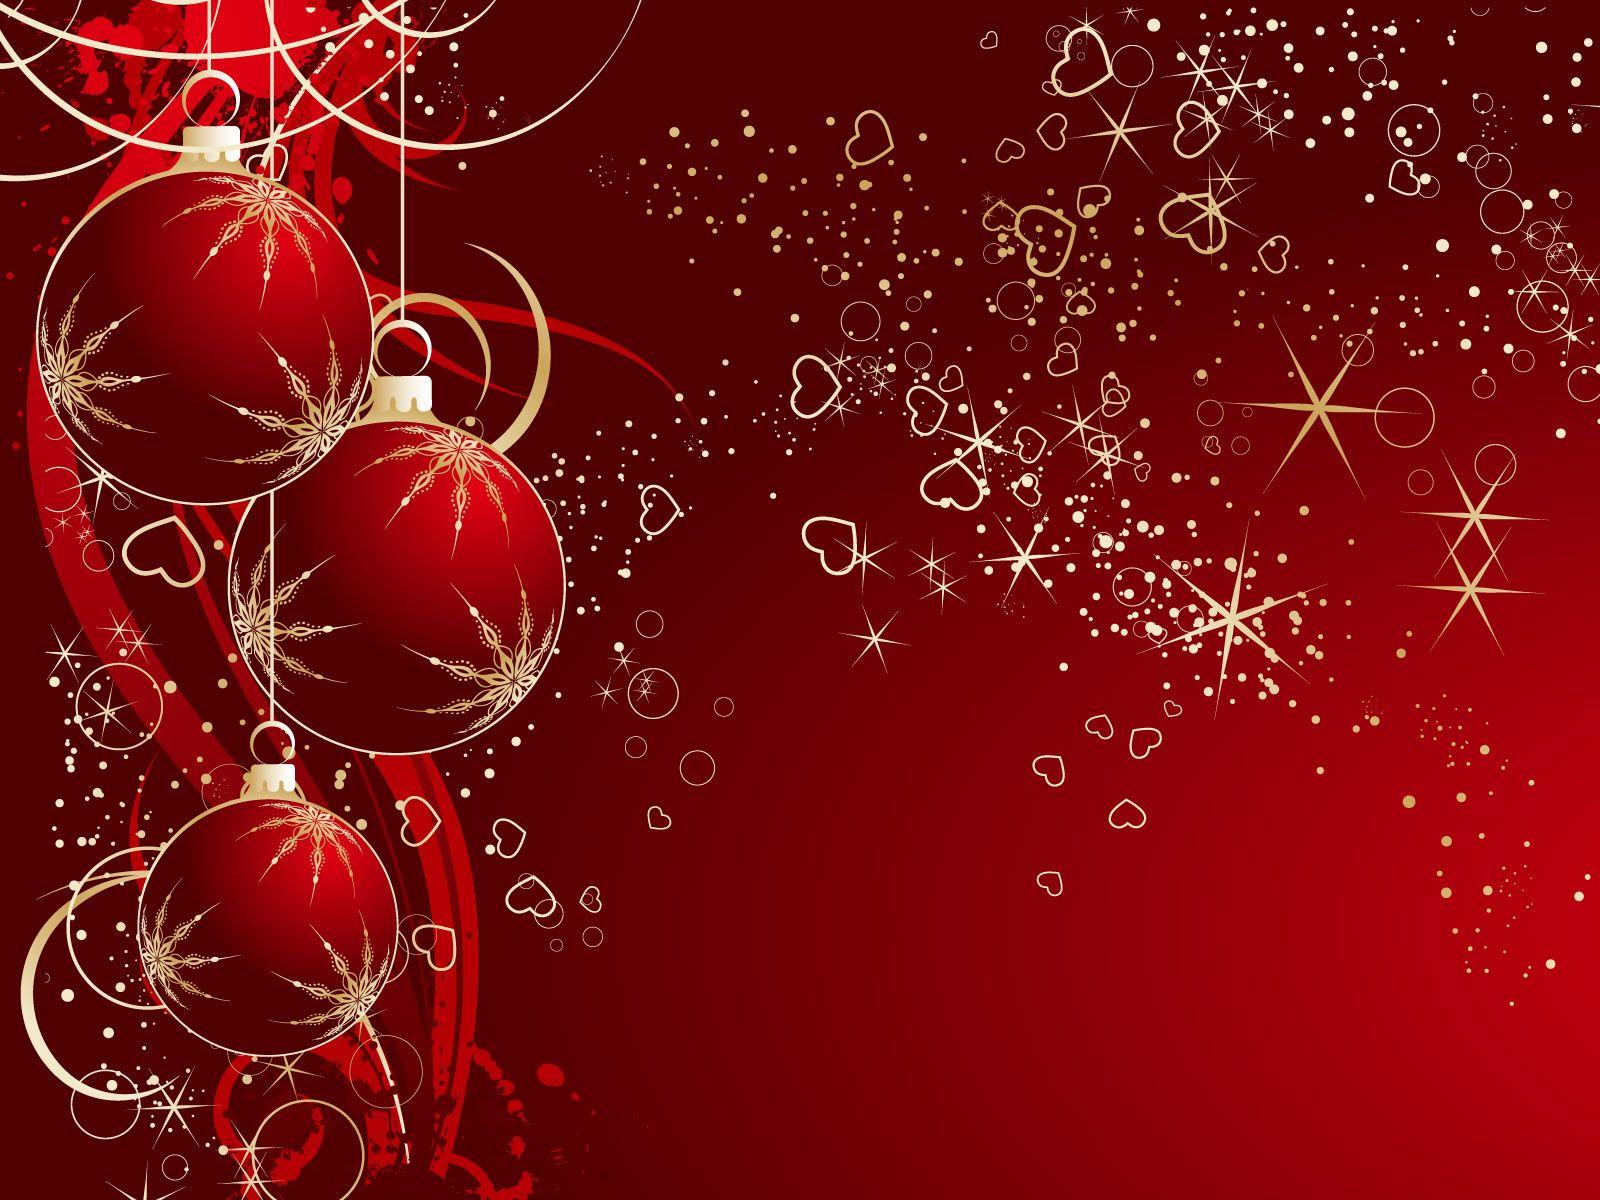 Free Christmas Backgrounds Wallpapers - Wallpaper Cave